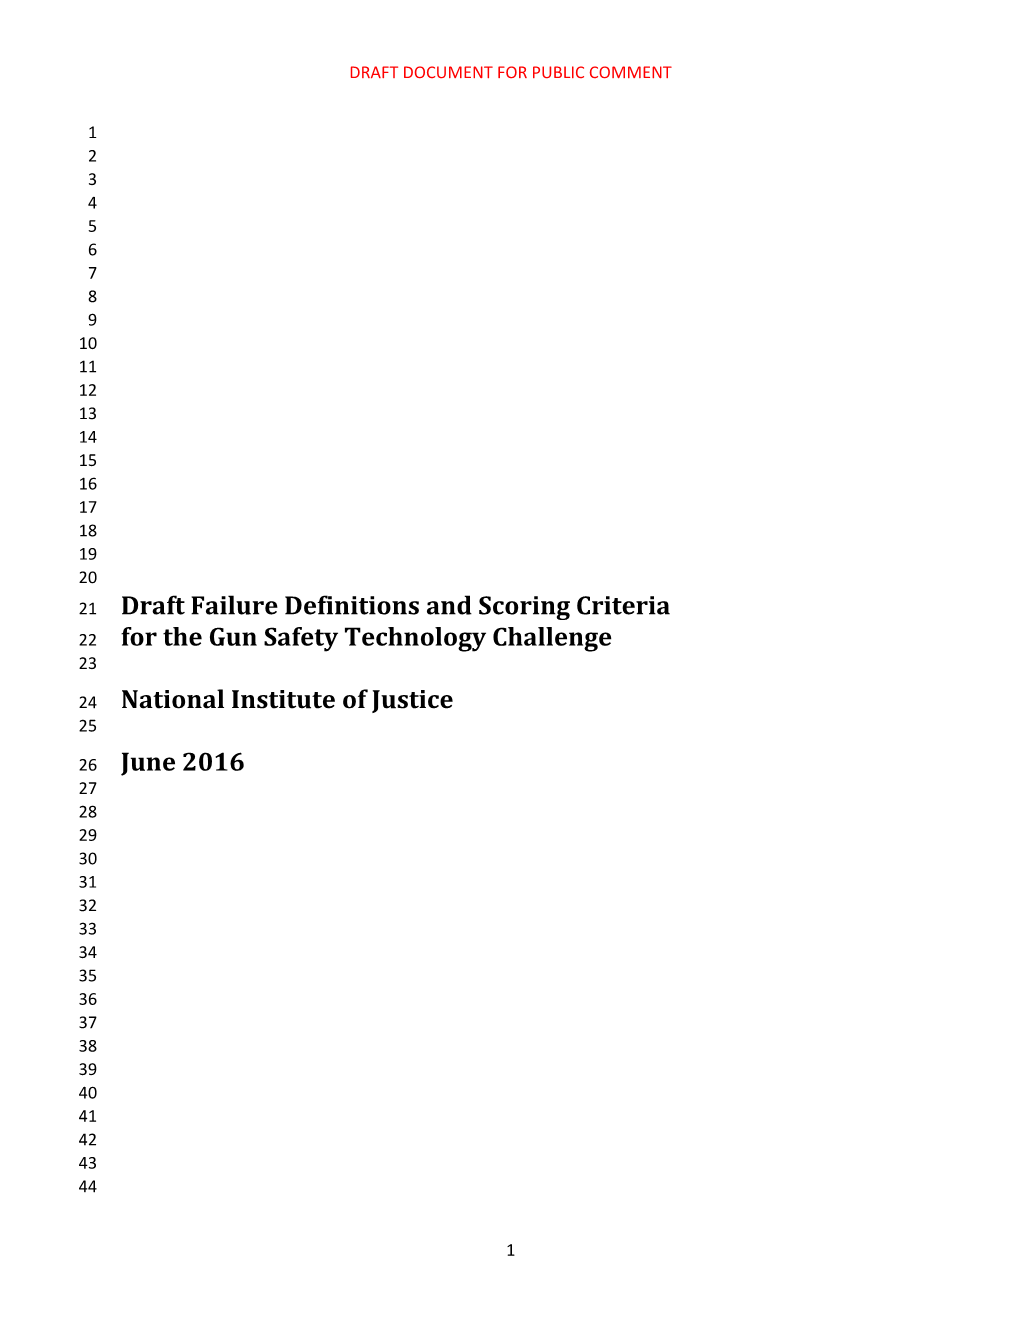 Draft Failure Definitions and Scoring Criteria for the Gun Safety Technology Challenge